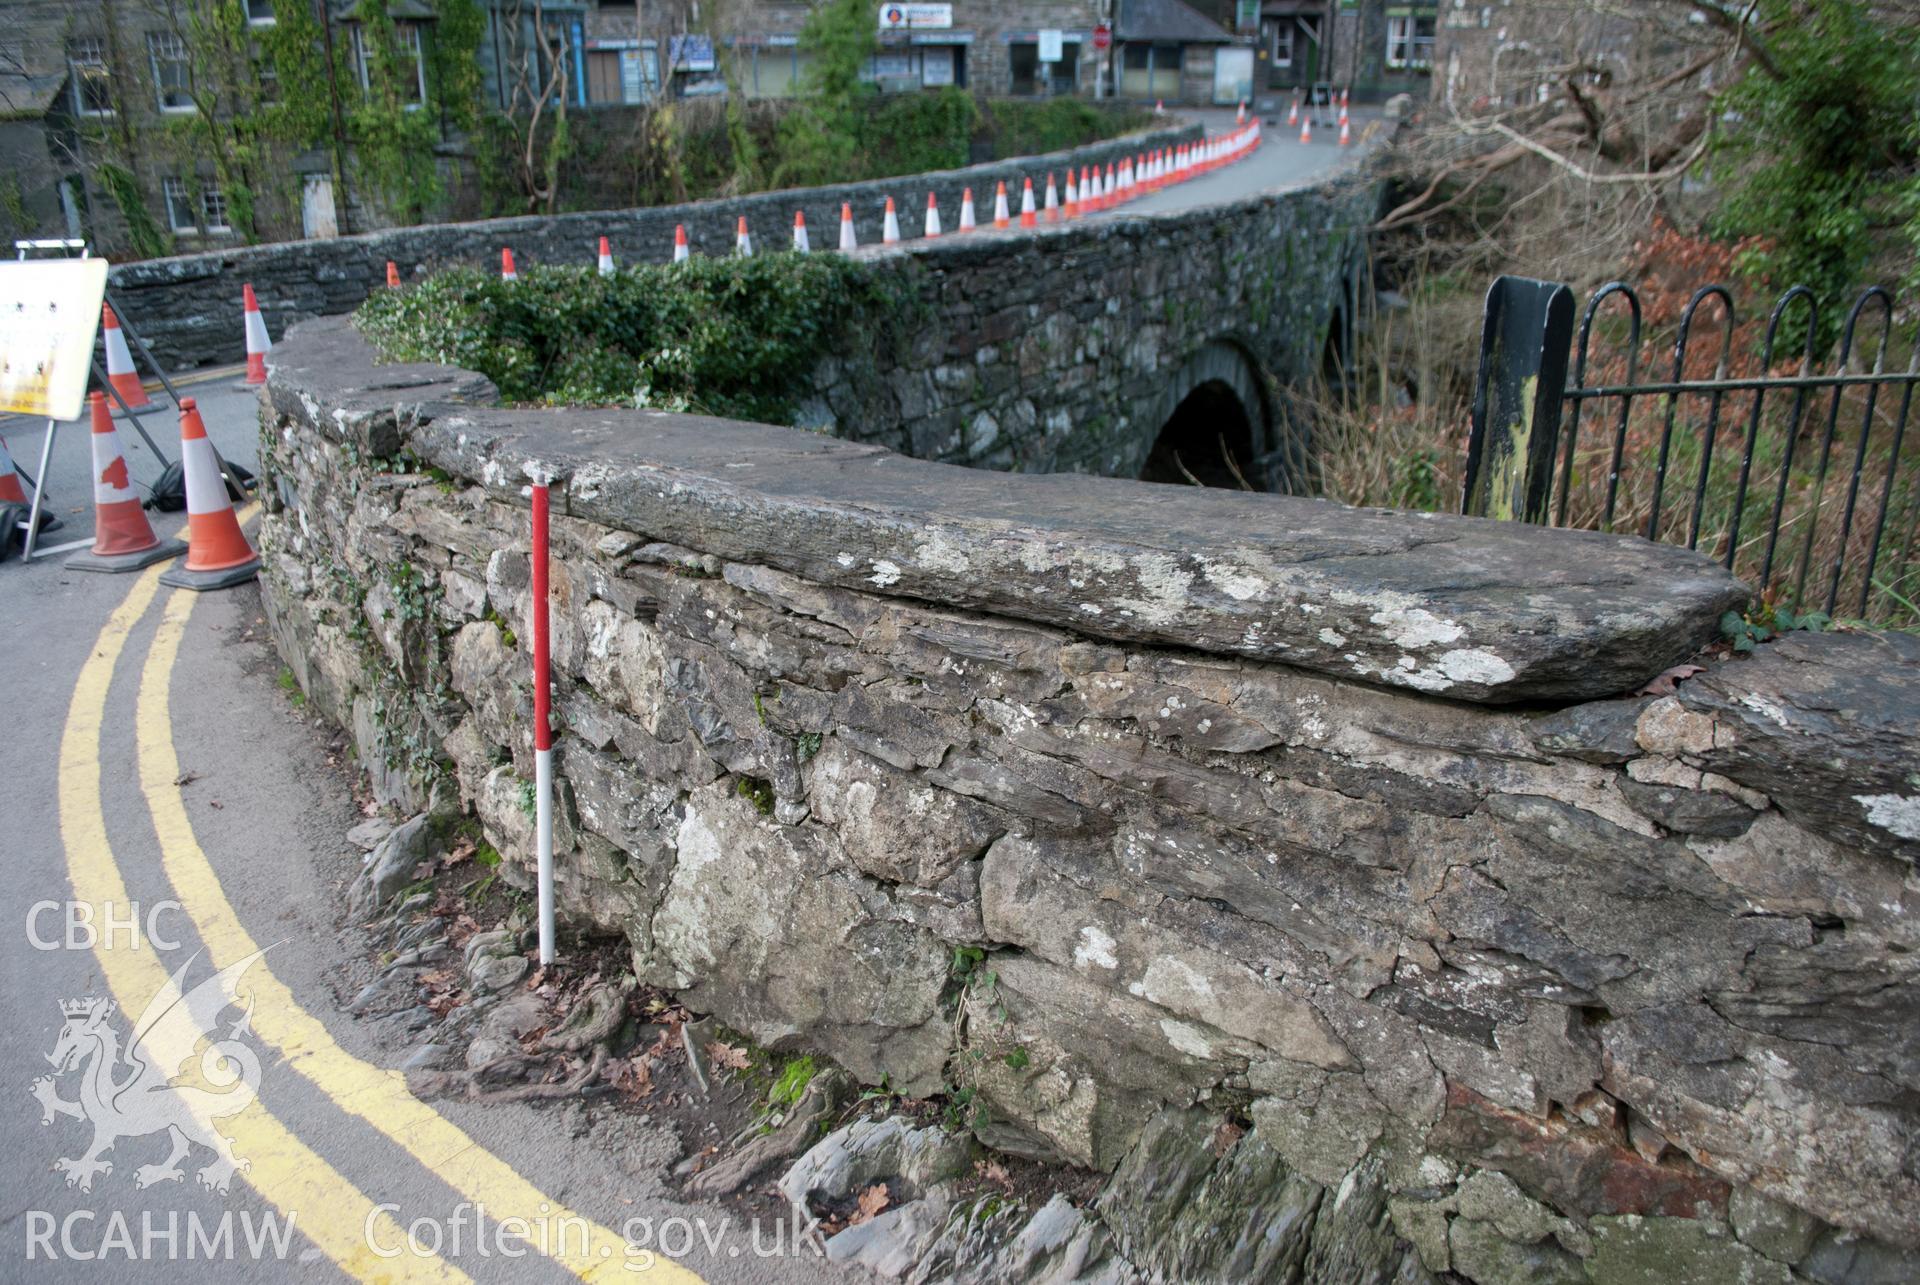 View of slipped coping stone at the northwest corner of the bridge parapet walling. View from the north. Digital photograph taken for Archaeological Watching Brief at Pont y Pair, Betws y Coed, 2019. Gwynedd Archaeological Trust Project ref G2587.